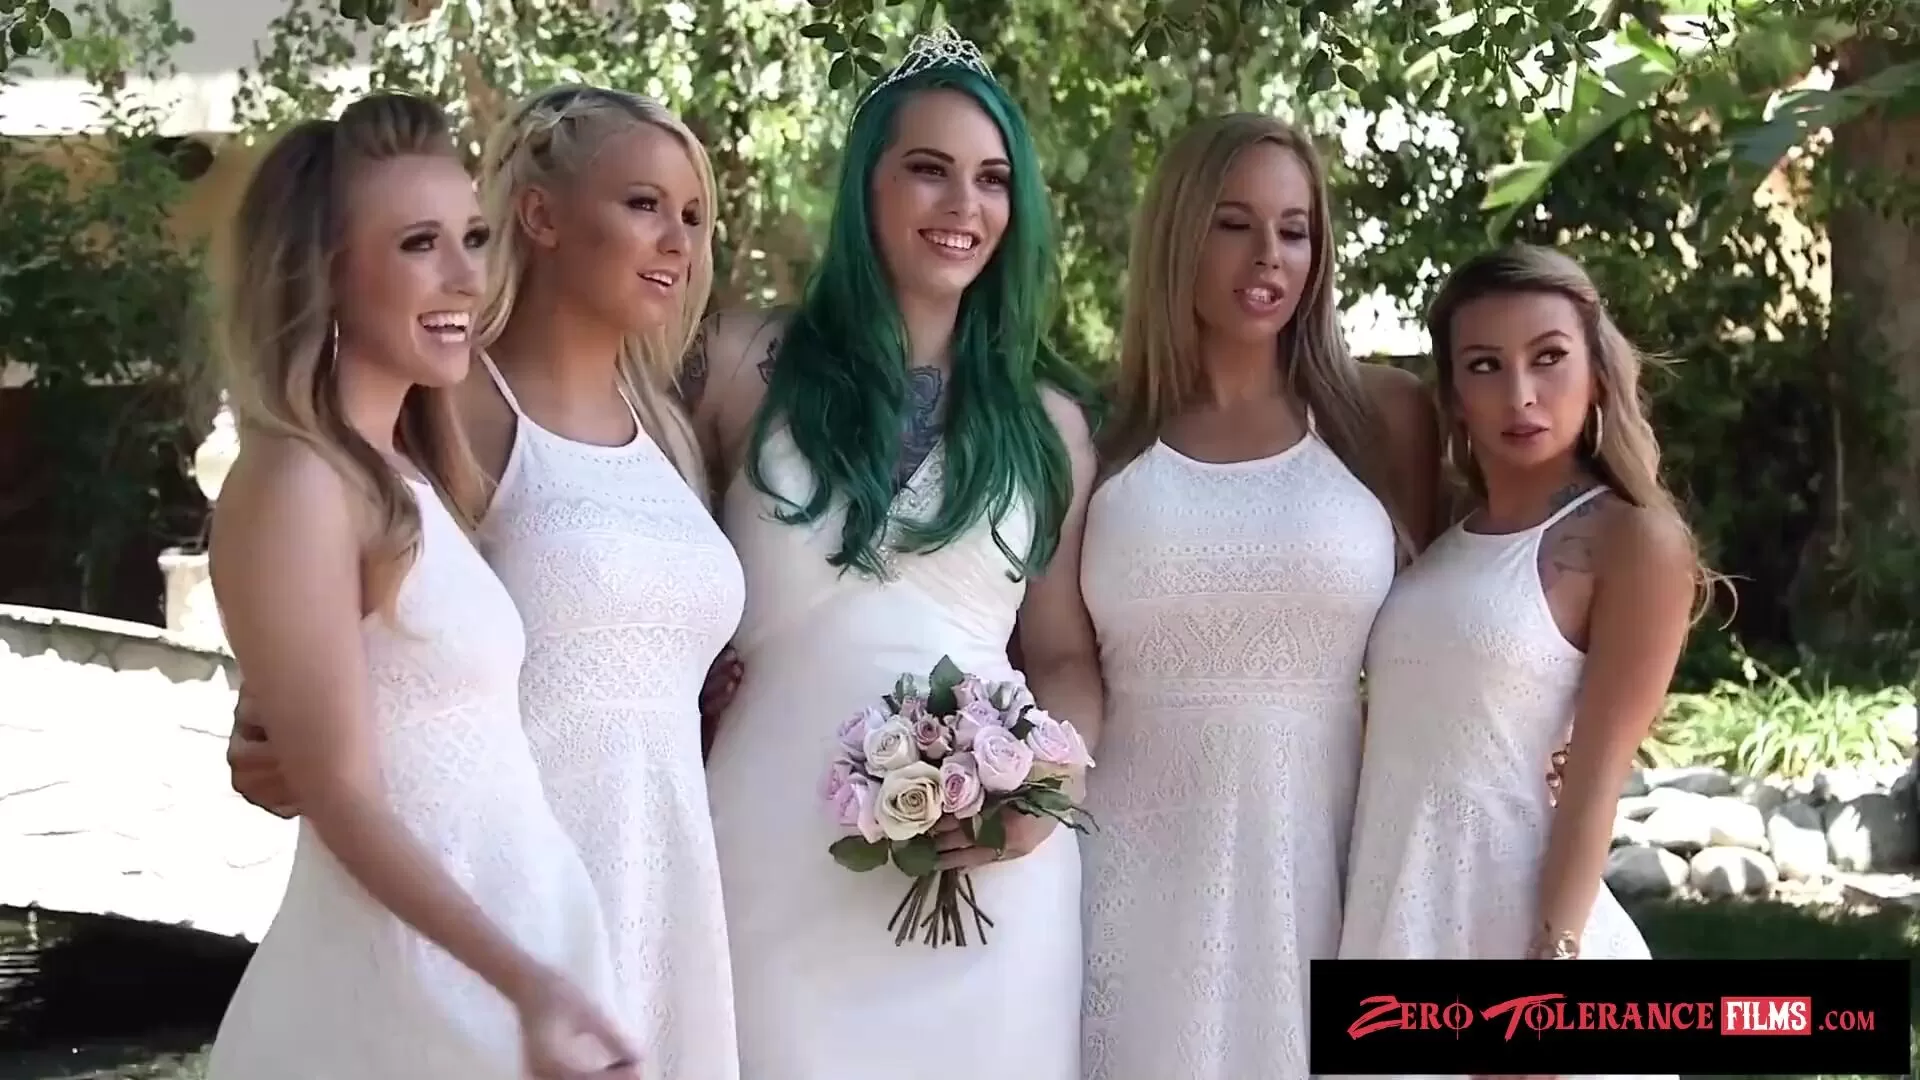 Real wedding orgy of perverted bride, groom and their friends picture